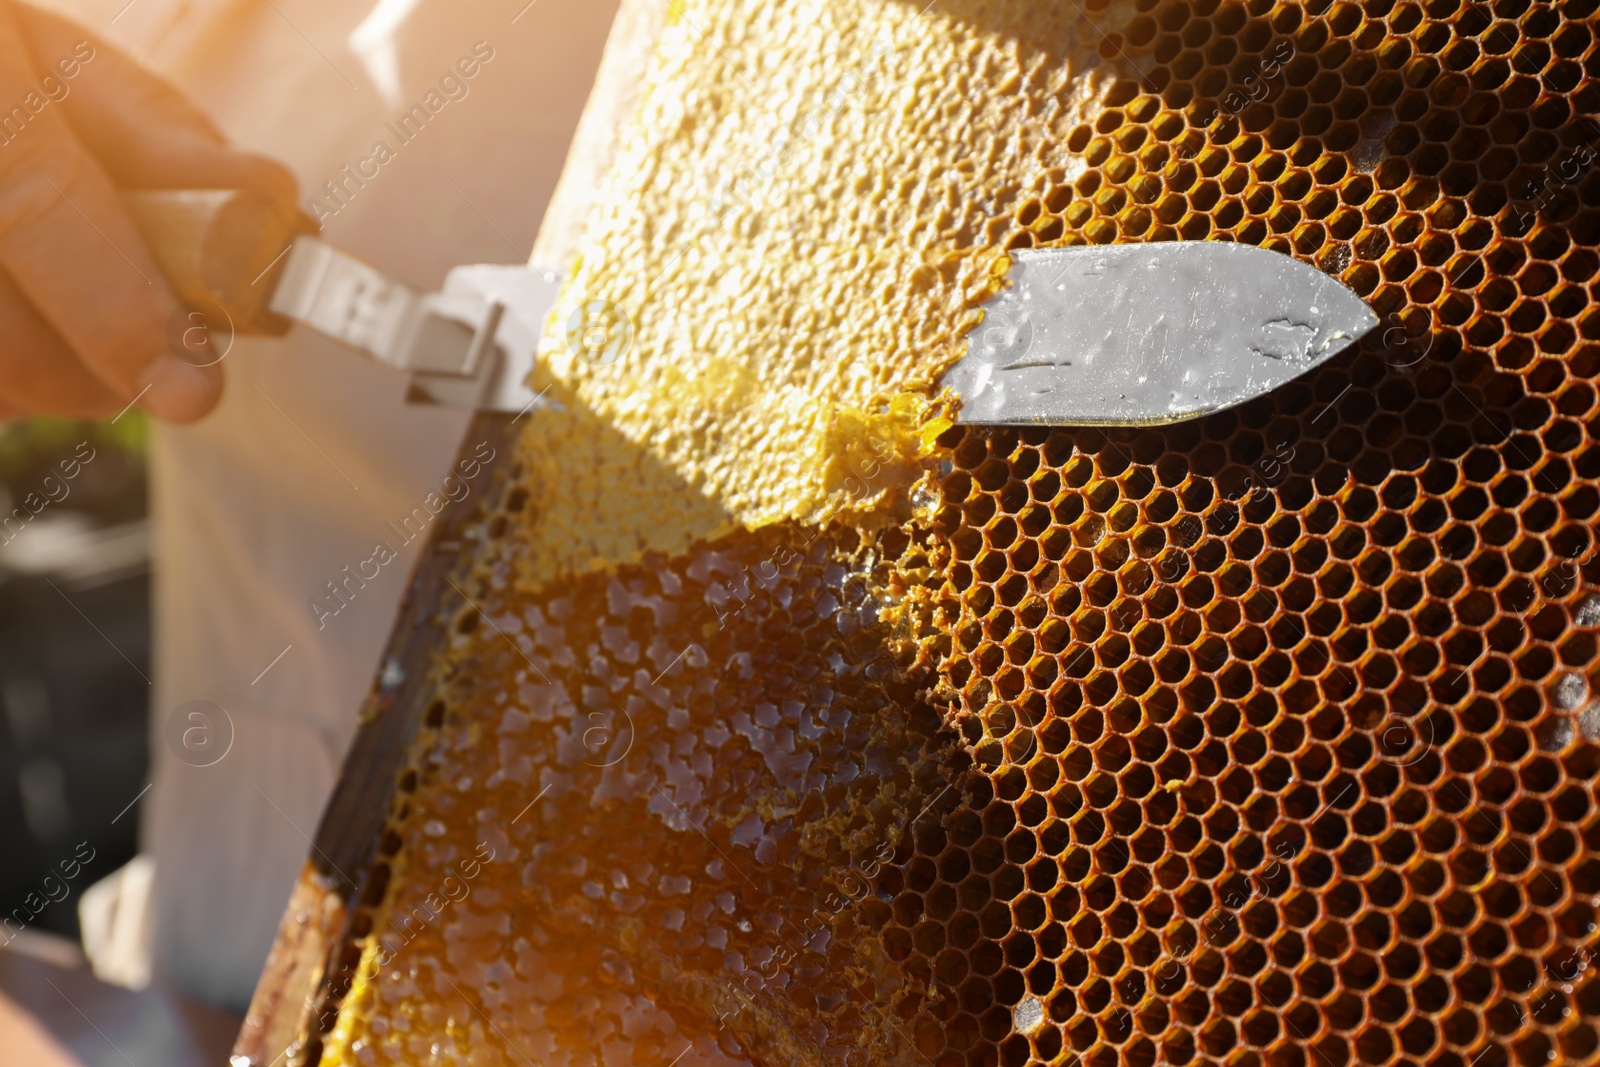 Photo of Beekeeper uncapping honeycomb frame with knife, closeup